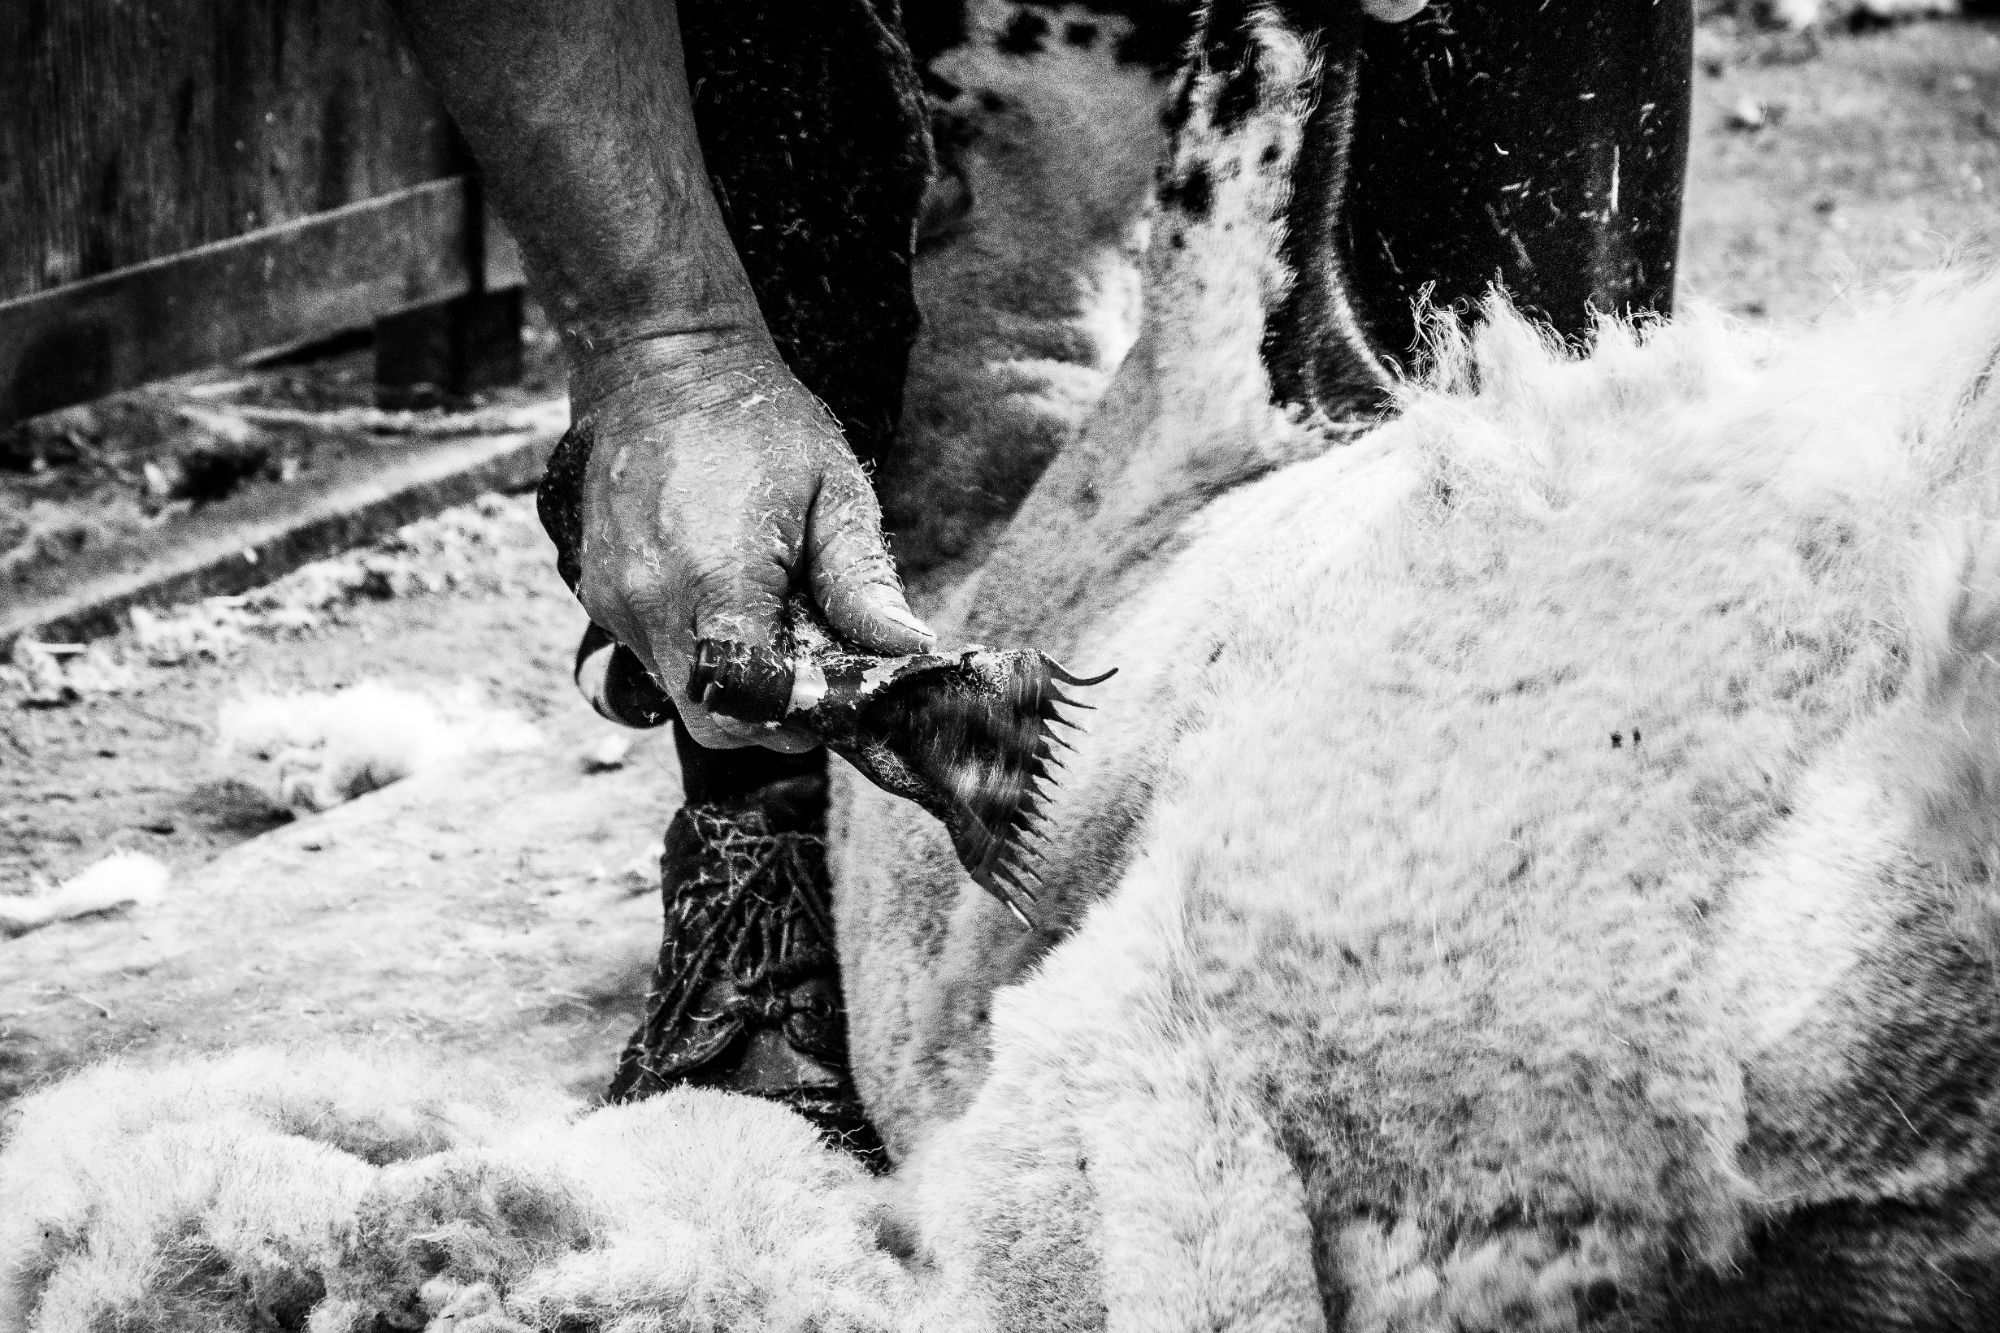 A farmer is clipping a sheep in this black and white photograph. The image focuses on the clipper quickly moving side to side before the farmer shaves on the next bit of wool.